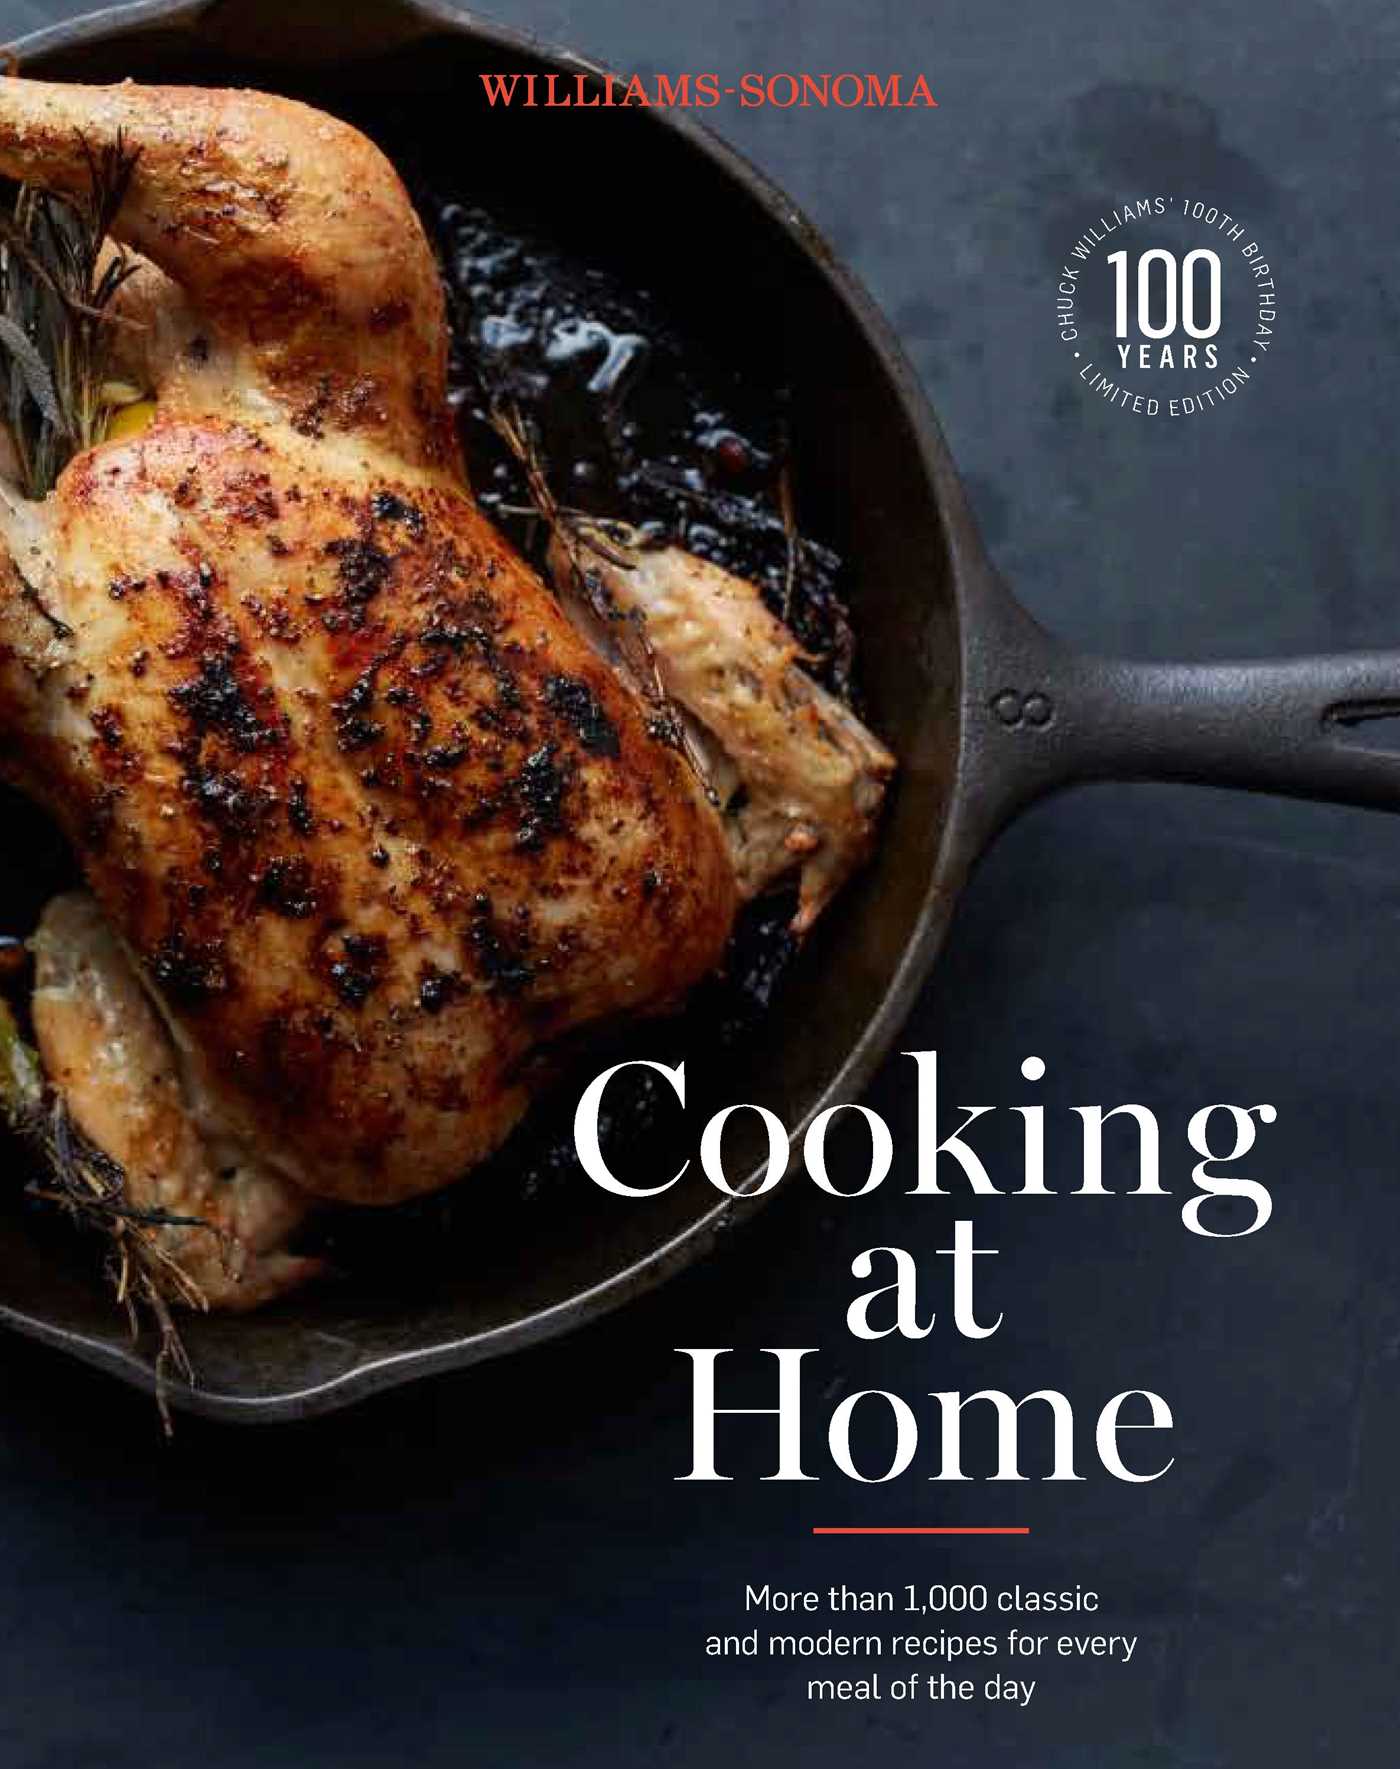 Book, Cooking at Home